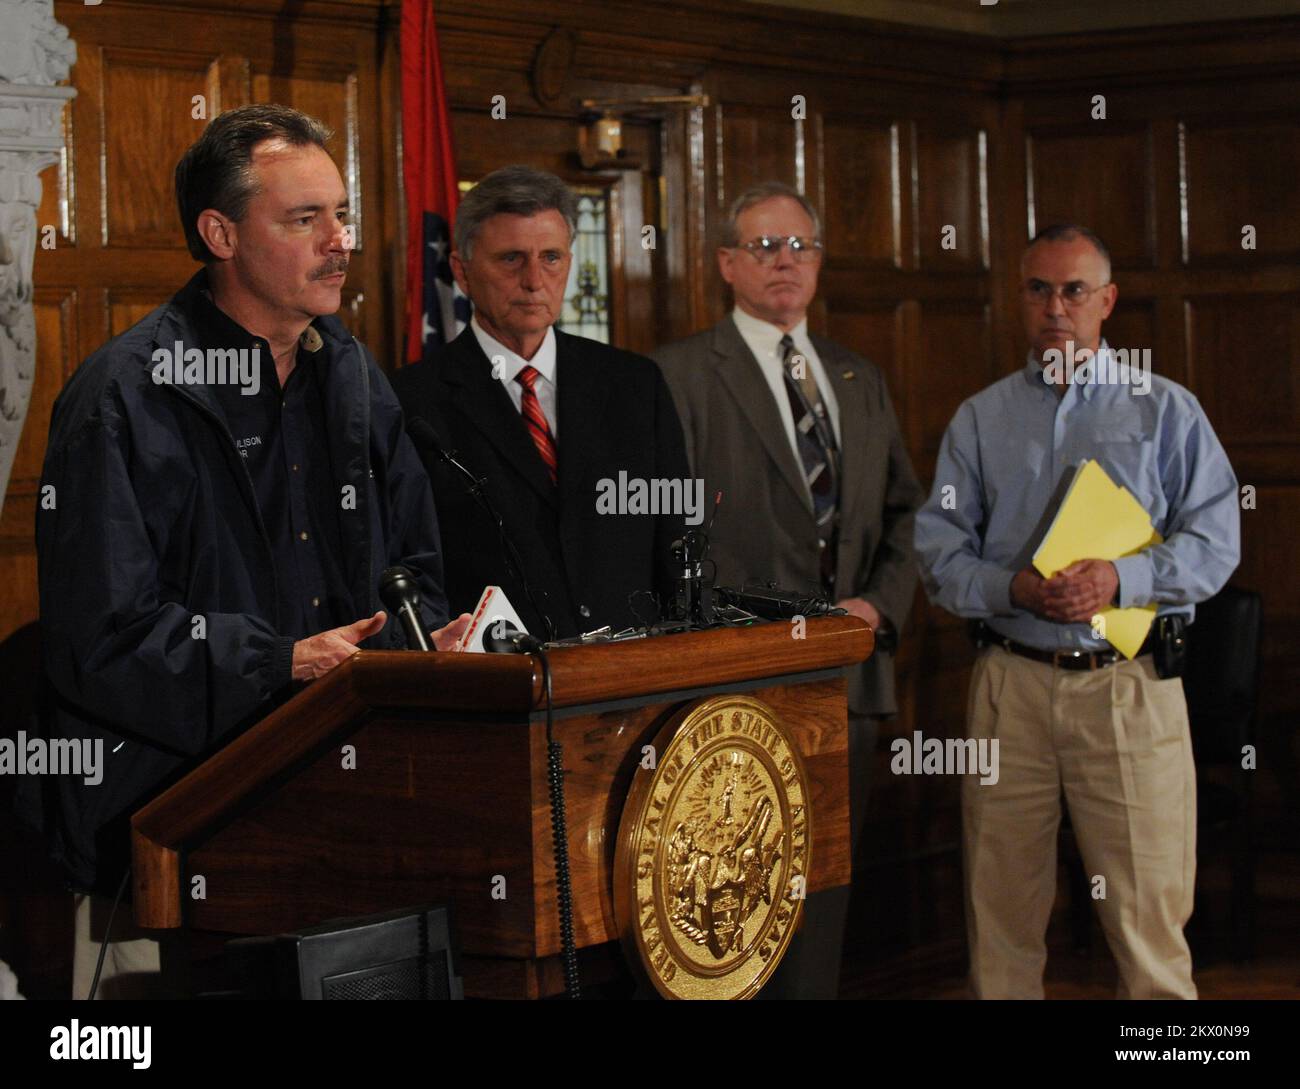 Severe Storms, Tornadoes, and Flooding,  LIttle Rock, AR, March 31, 2008   FEMA Administrator David Paulison, left, speaks at a press conference with Arkansas Governor Mike Beebe, second from right, and David Maxwell, far right, Director of Arkansas Department of Emergency Management at the State House. LIttle Rock, AR-FEMA Admistrator Dave Paulison, left, speaks at a press conference with Arkansas Governor Mike Beebe, second from right, and David Maxwell, far right, Director of Arkansas Department of  Emergency Management at the State House.. Photographs Relating to Disasters and Emergency Ma Stock Photo